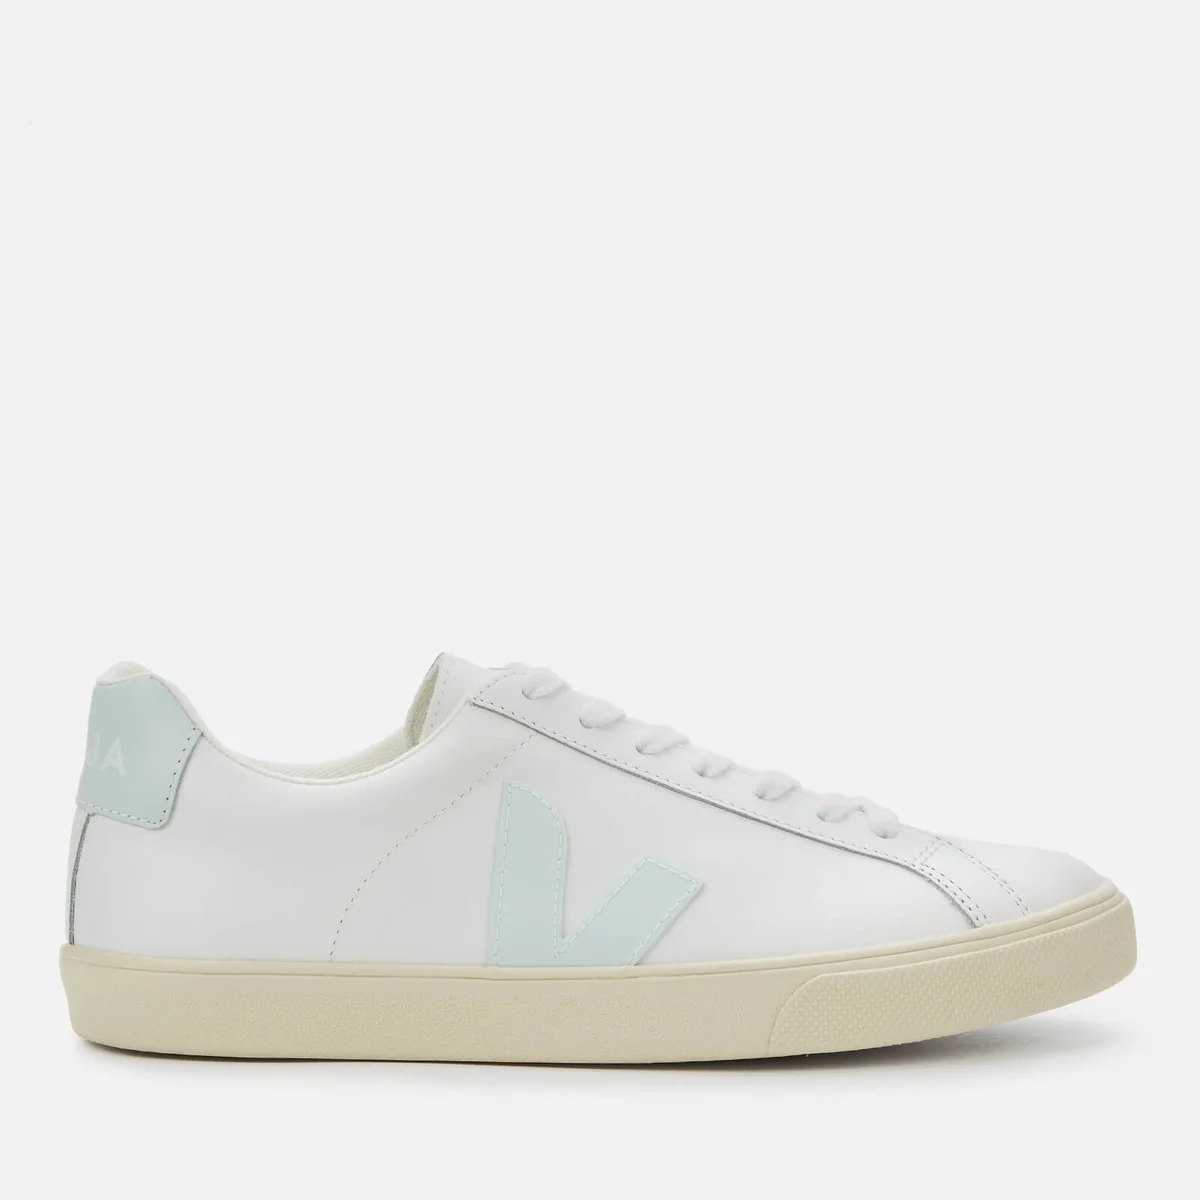 Veja Women's Esplar Leather Low Top Trainers - Extra White/Menthol Image 1